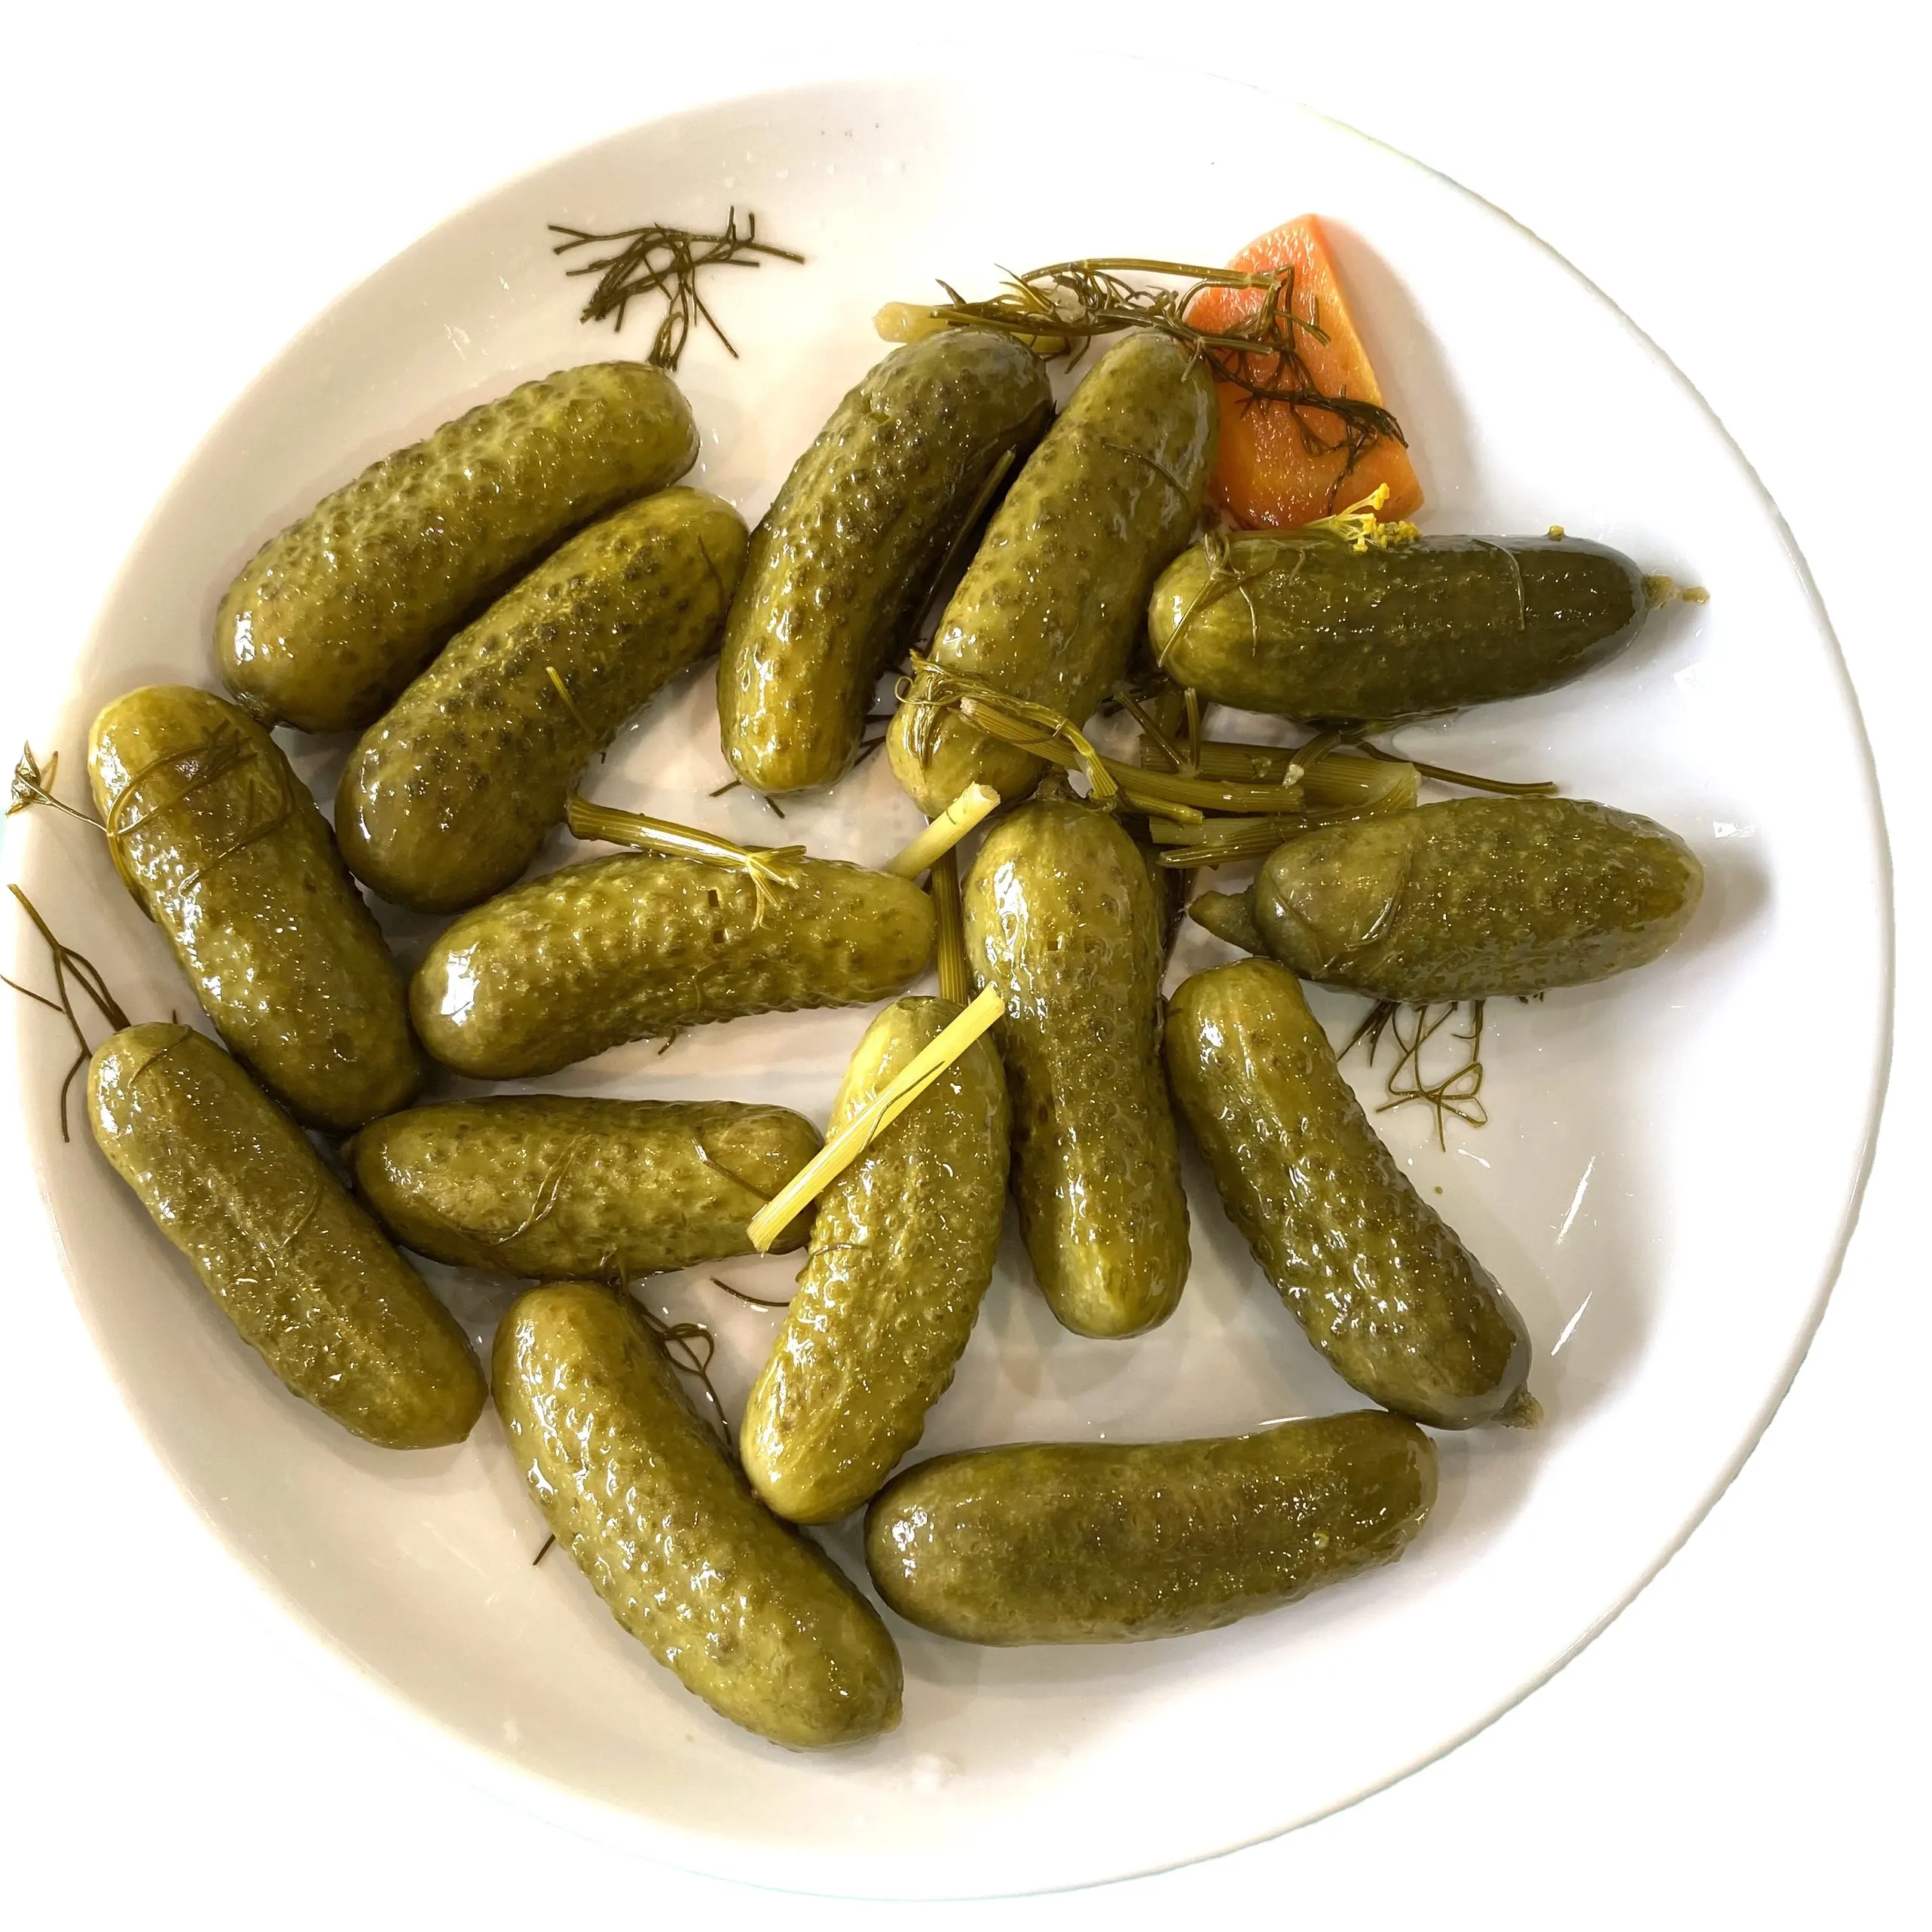 Top selling Best Grade ISO STANDARD Low Price Vietnam CANNED WHOLE GHERKINS BABY CUCUMBER 20oz, 30oz, A10